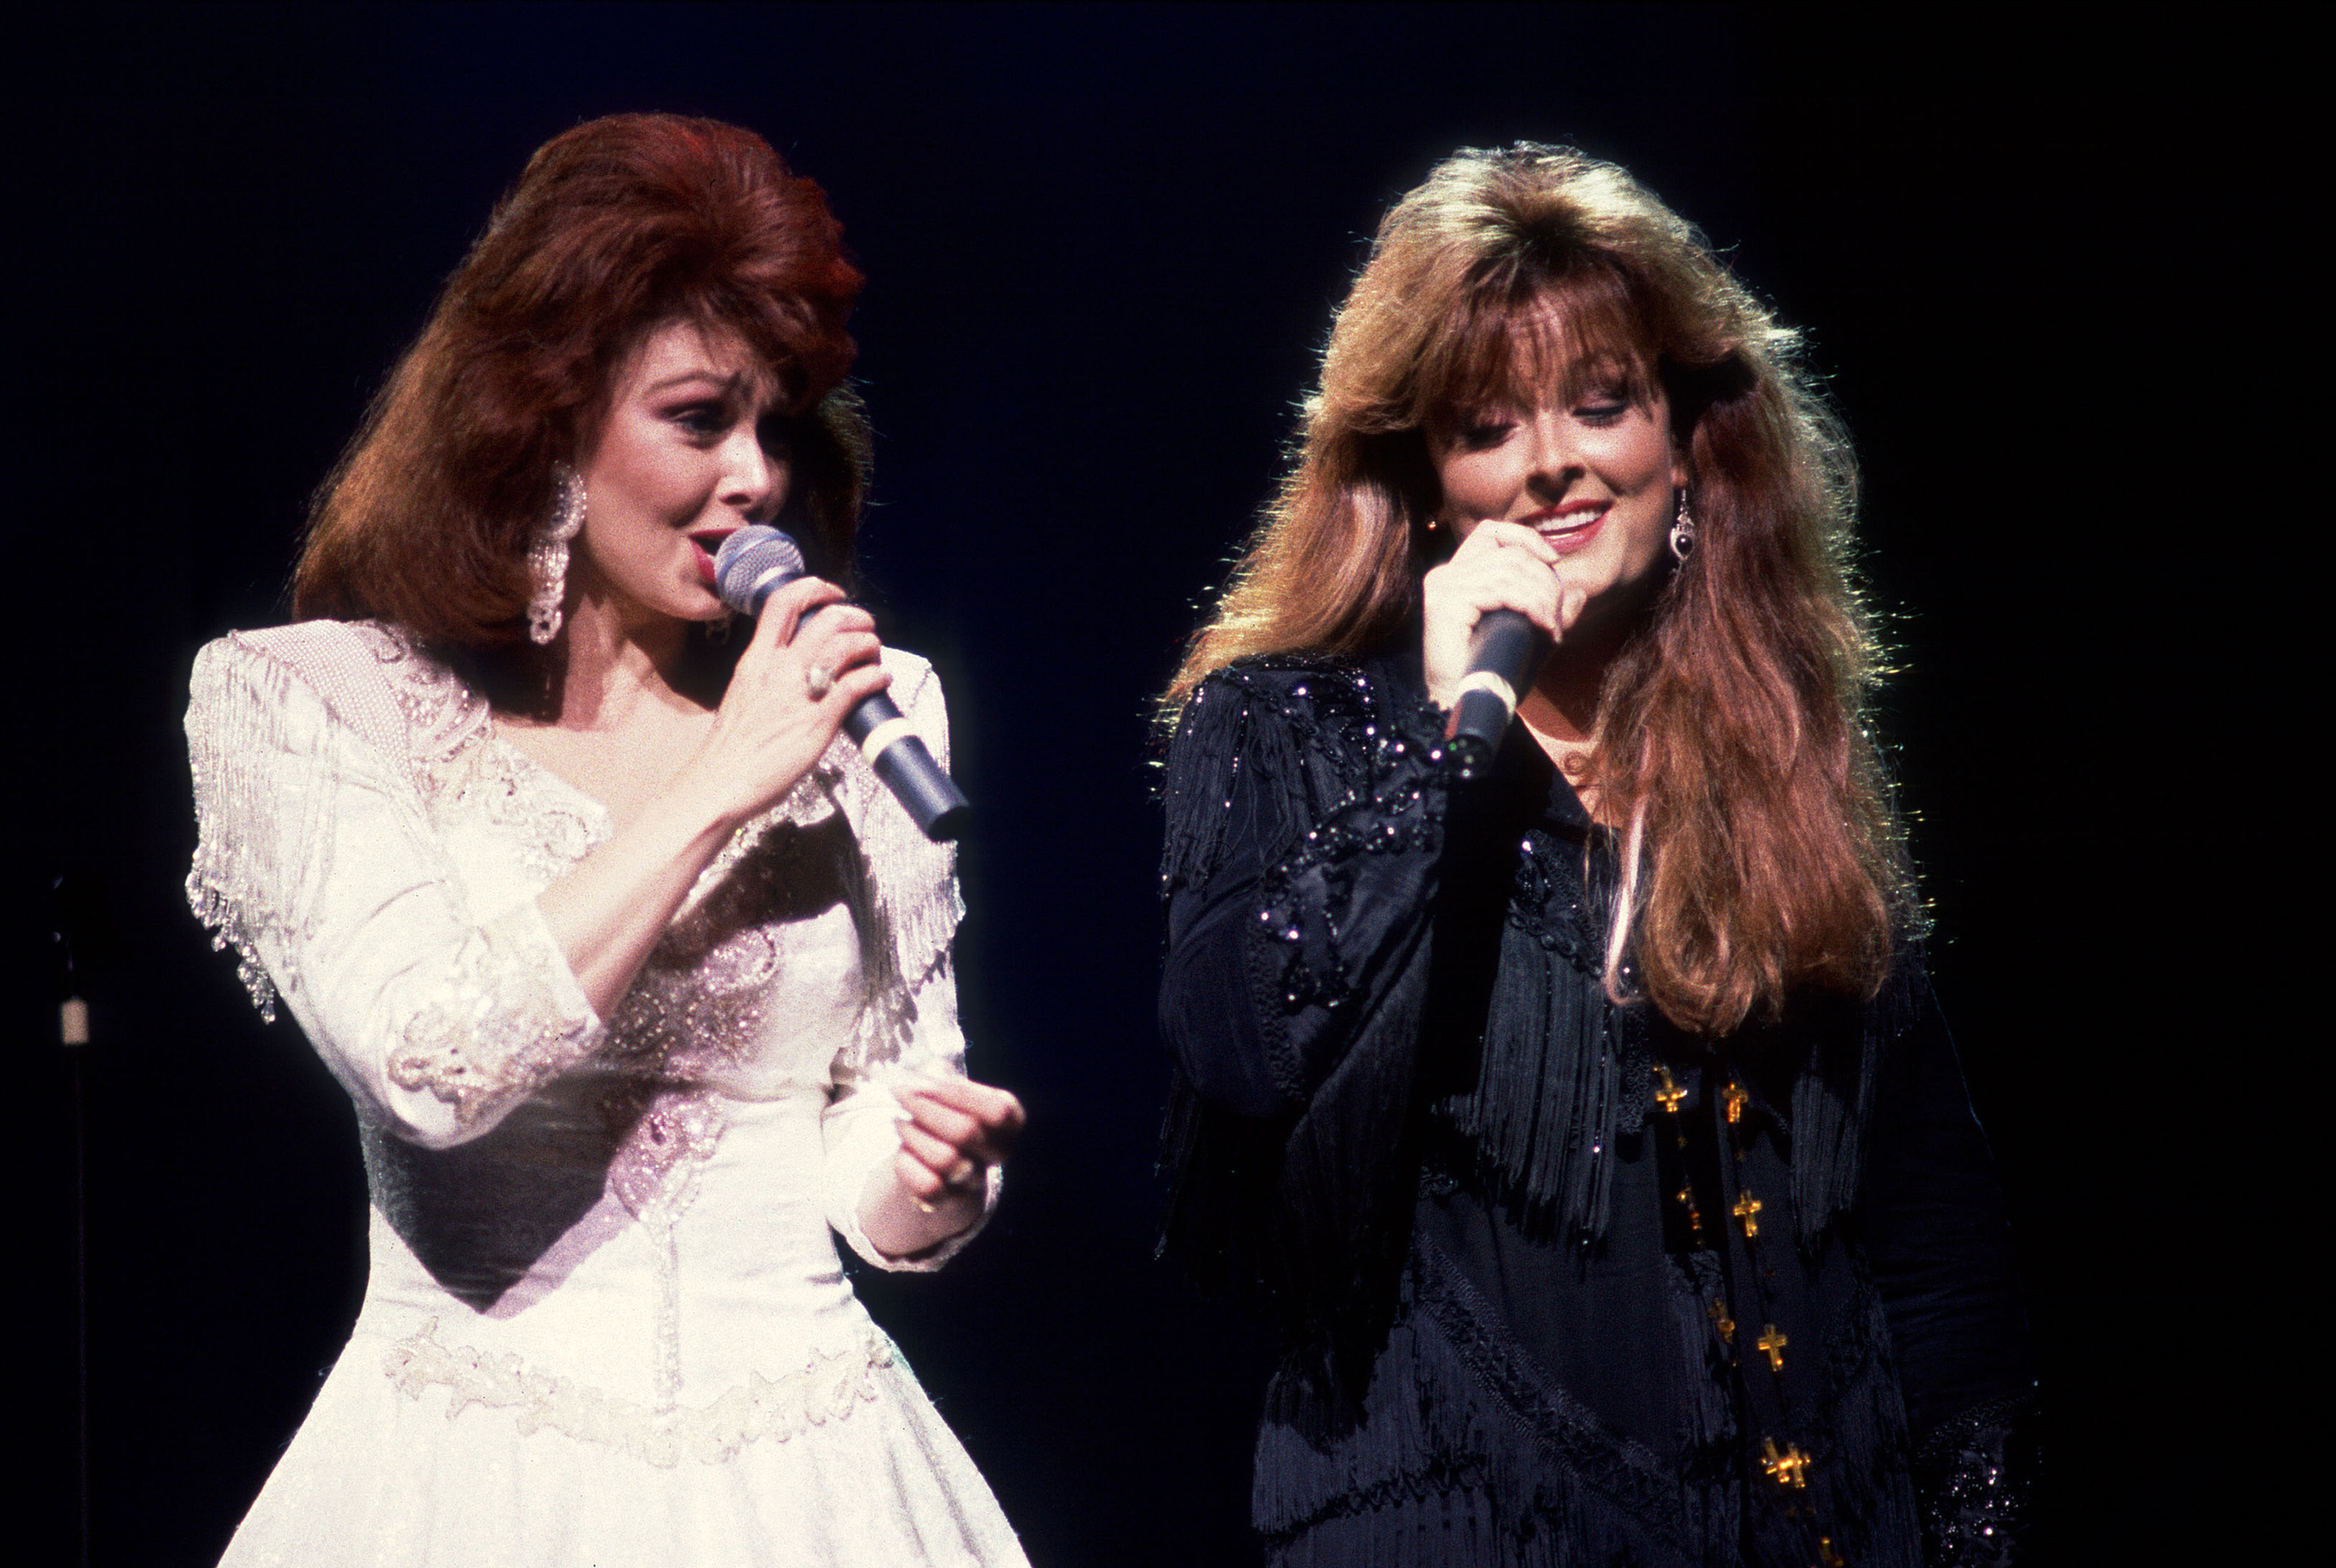 <p>It wasn't until 2022 that the Country Music Hall of Fame finally inducted one of its most iconic duos into the Hall of Fame. Unfortunately, the induction came just one day after Naomi Judd's untimely death. </p><p><a href='https://www.msn.com/en-us/community/channel/vid-cj9pqbr0vn9in2b6ddcd8sfgpfq6x6utp44fssrv6mc2gtybw0us'>Follow us on MSN to see more of our exclusive entertainment content.</a></p>